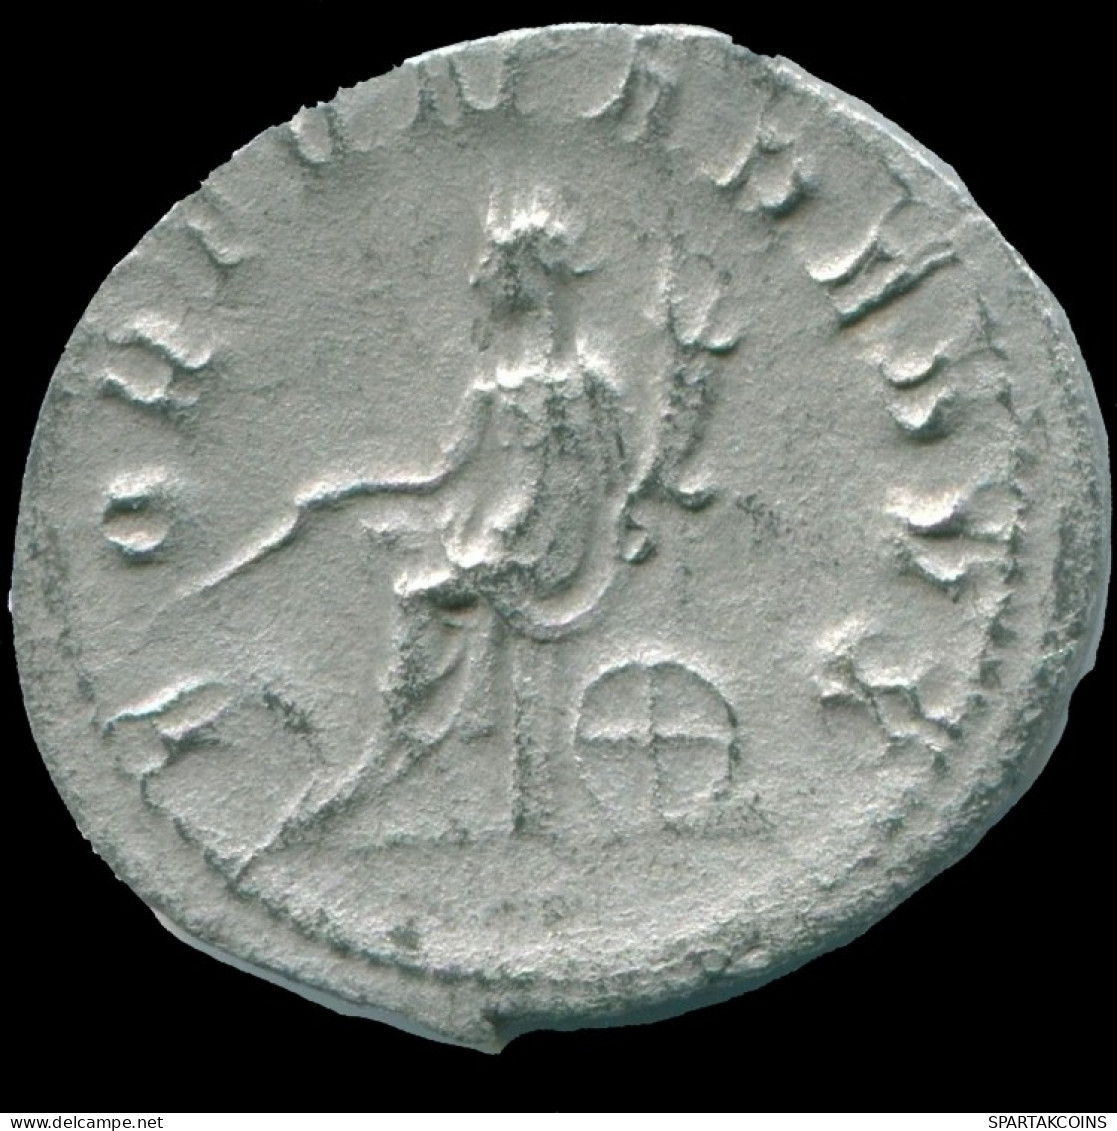 GORDIAN III AR ANTONINIANUS ROME AD243 2ND OFFICINA FORTVNA REDVX #ANC13140.38.U.A - The Military Crisis (235 AD To 284 AD)